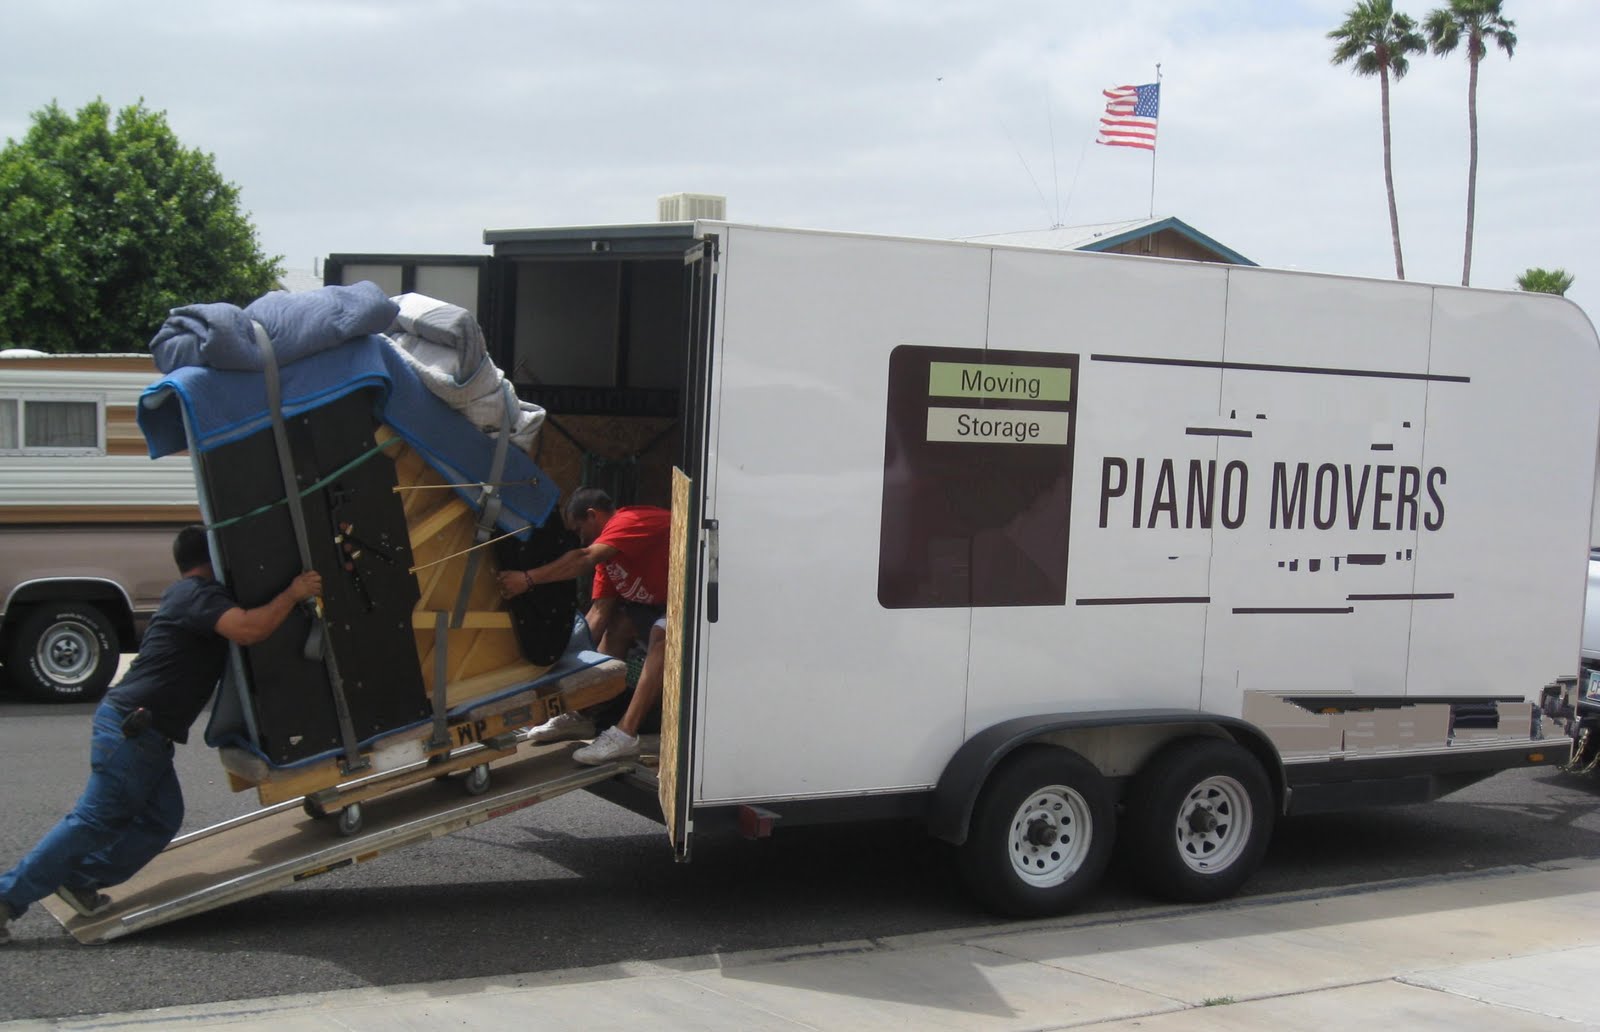 Piano Moving Services